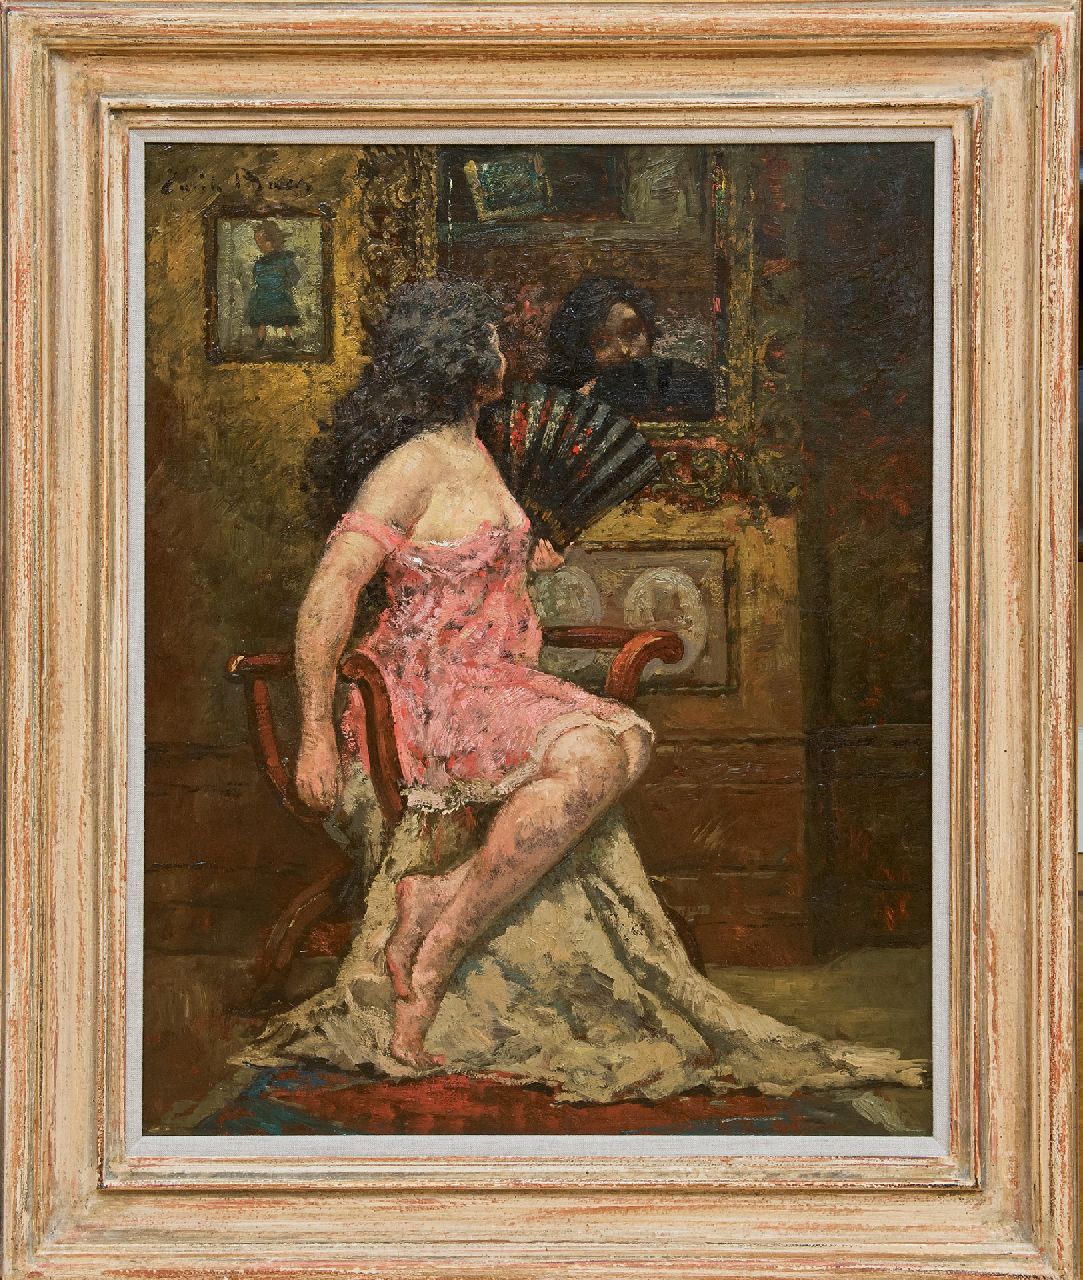 Baes E.  | Emile Baes | Paintings offered for sale | The Spanish fan, oil on canvas 70.7 x 56.1 cm, signed u.l.